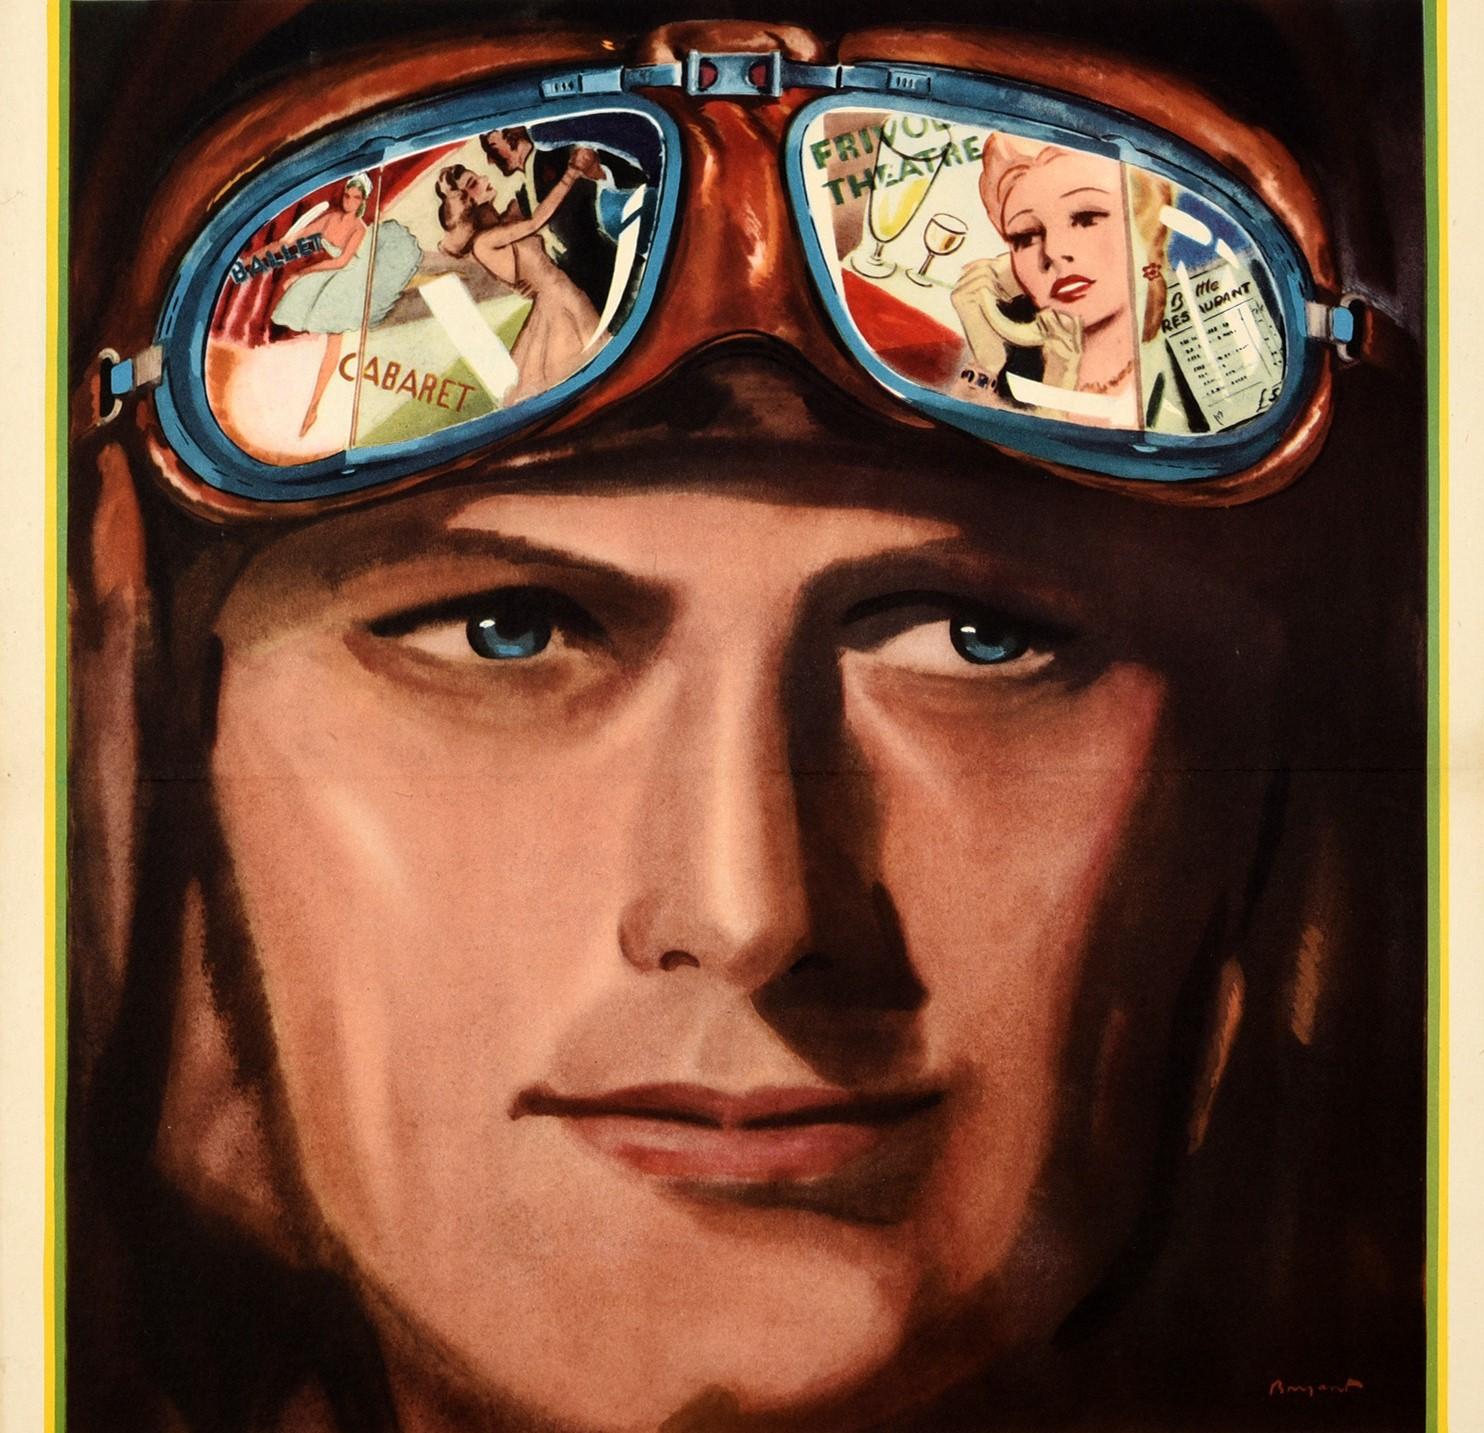 Original vintage poster, Don't Day-Dream / Keep your mind on the job and avoid accidents - featuring a great design depicting a young pilot wearing flying goggles on his head with images of a ballet dancer and a couple dancing together, a young lady